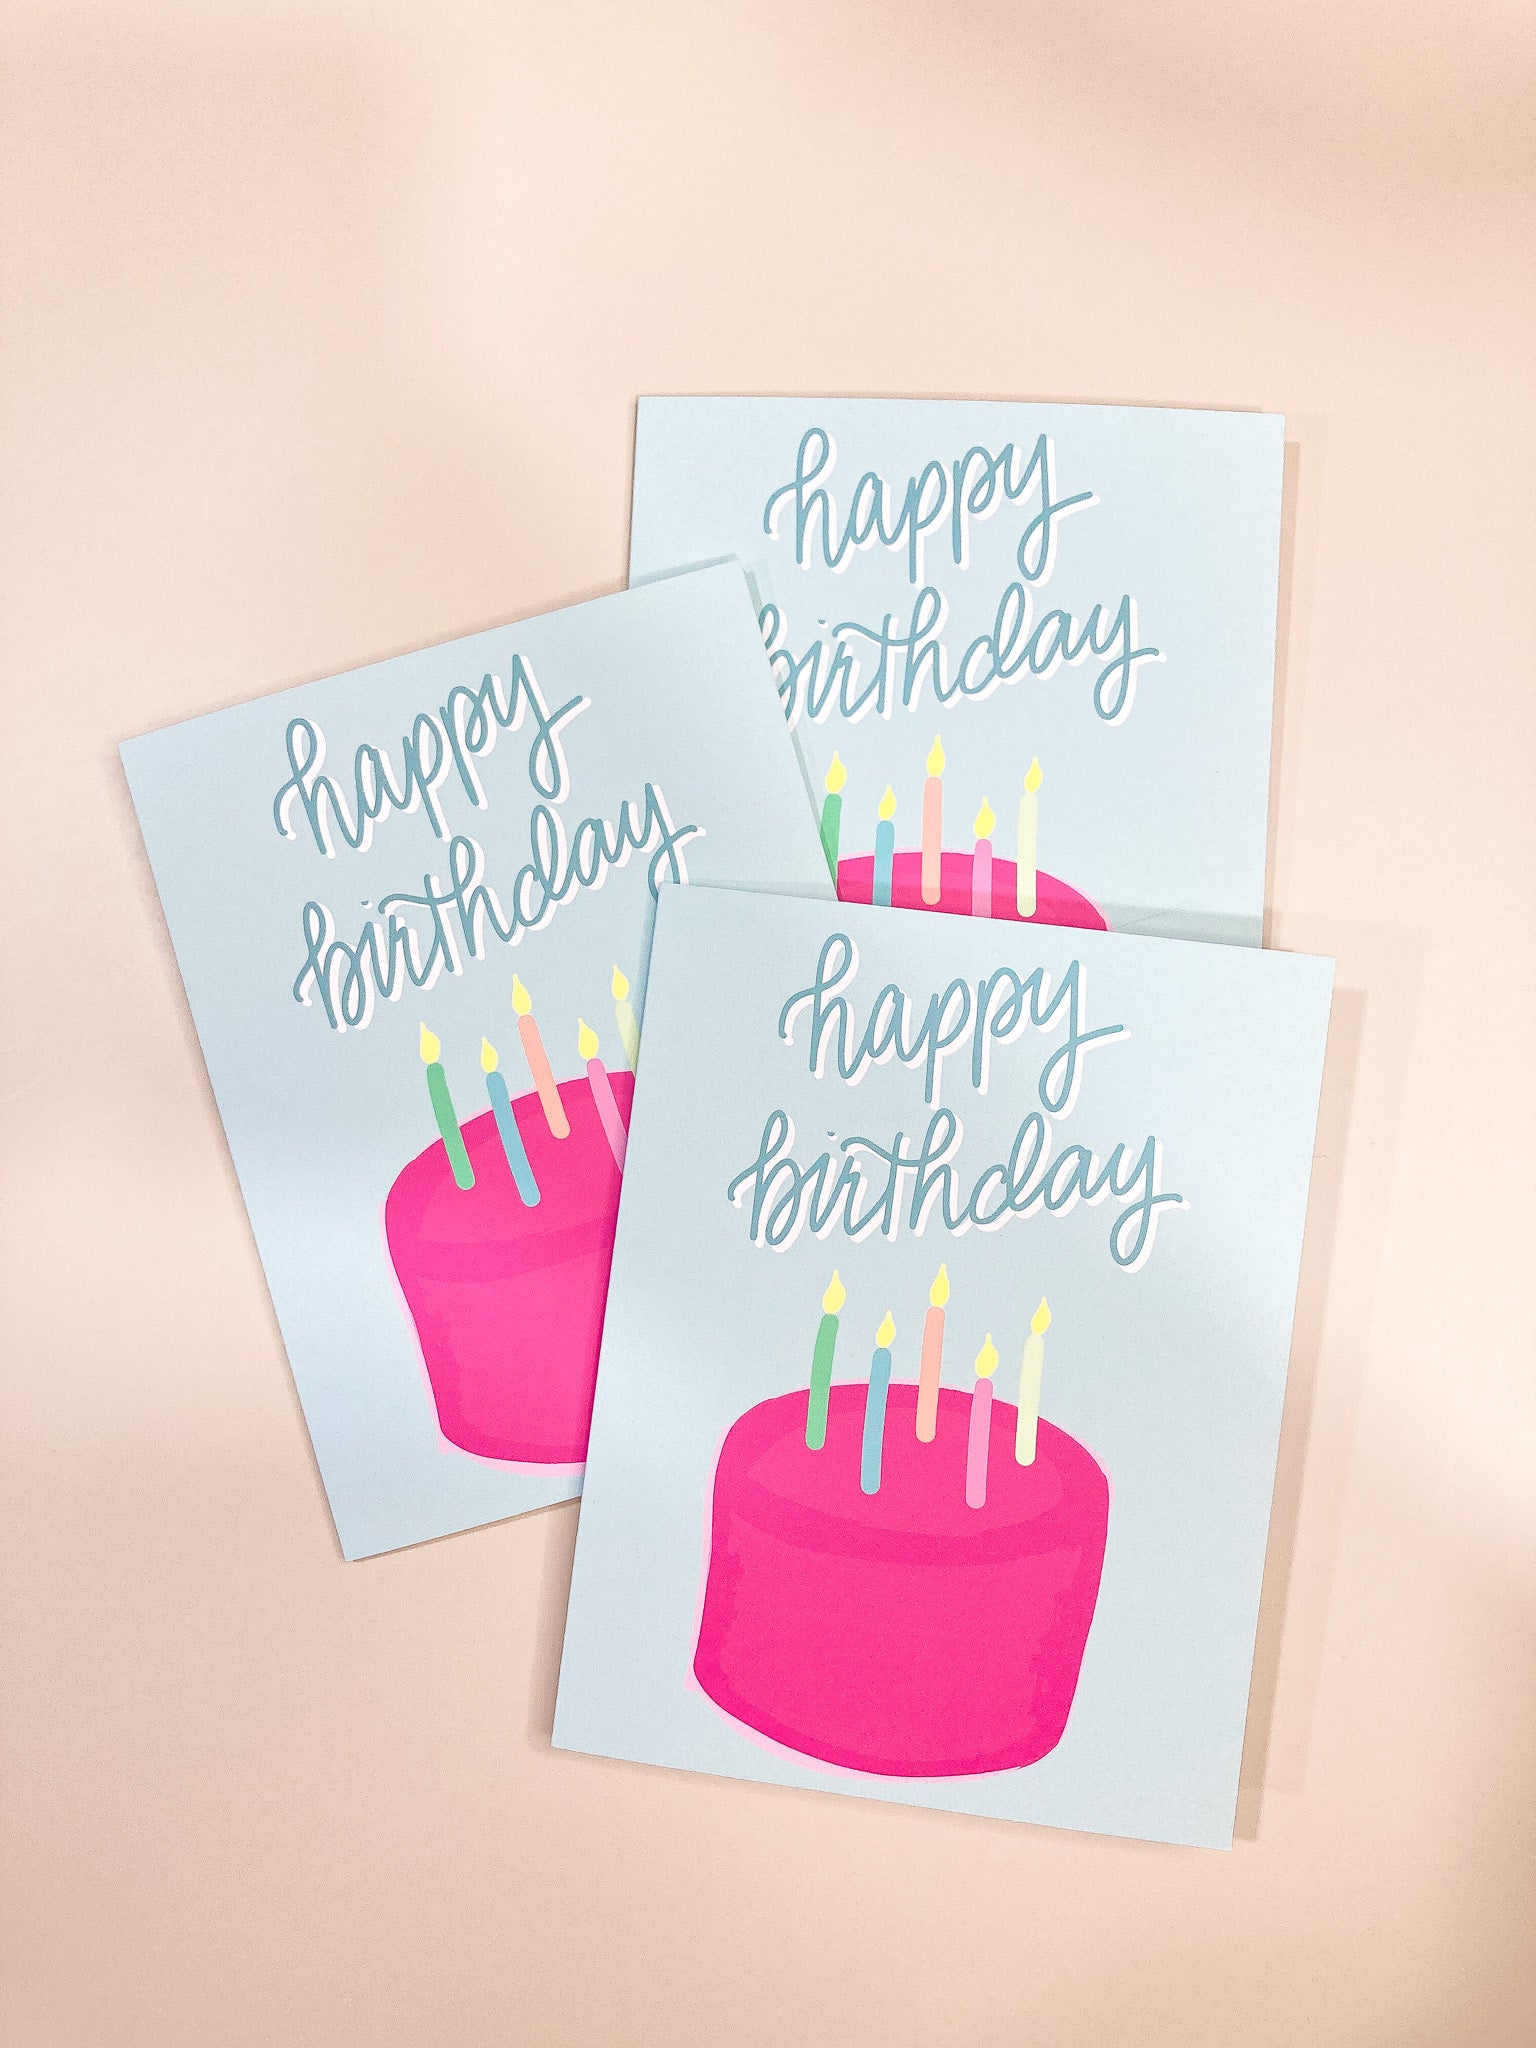 Birthday greeting Card. Each card measures 4.25" in height by 5.5" in width, featuring a blank interior for your personal message